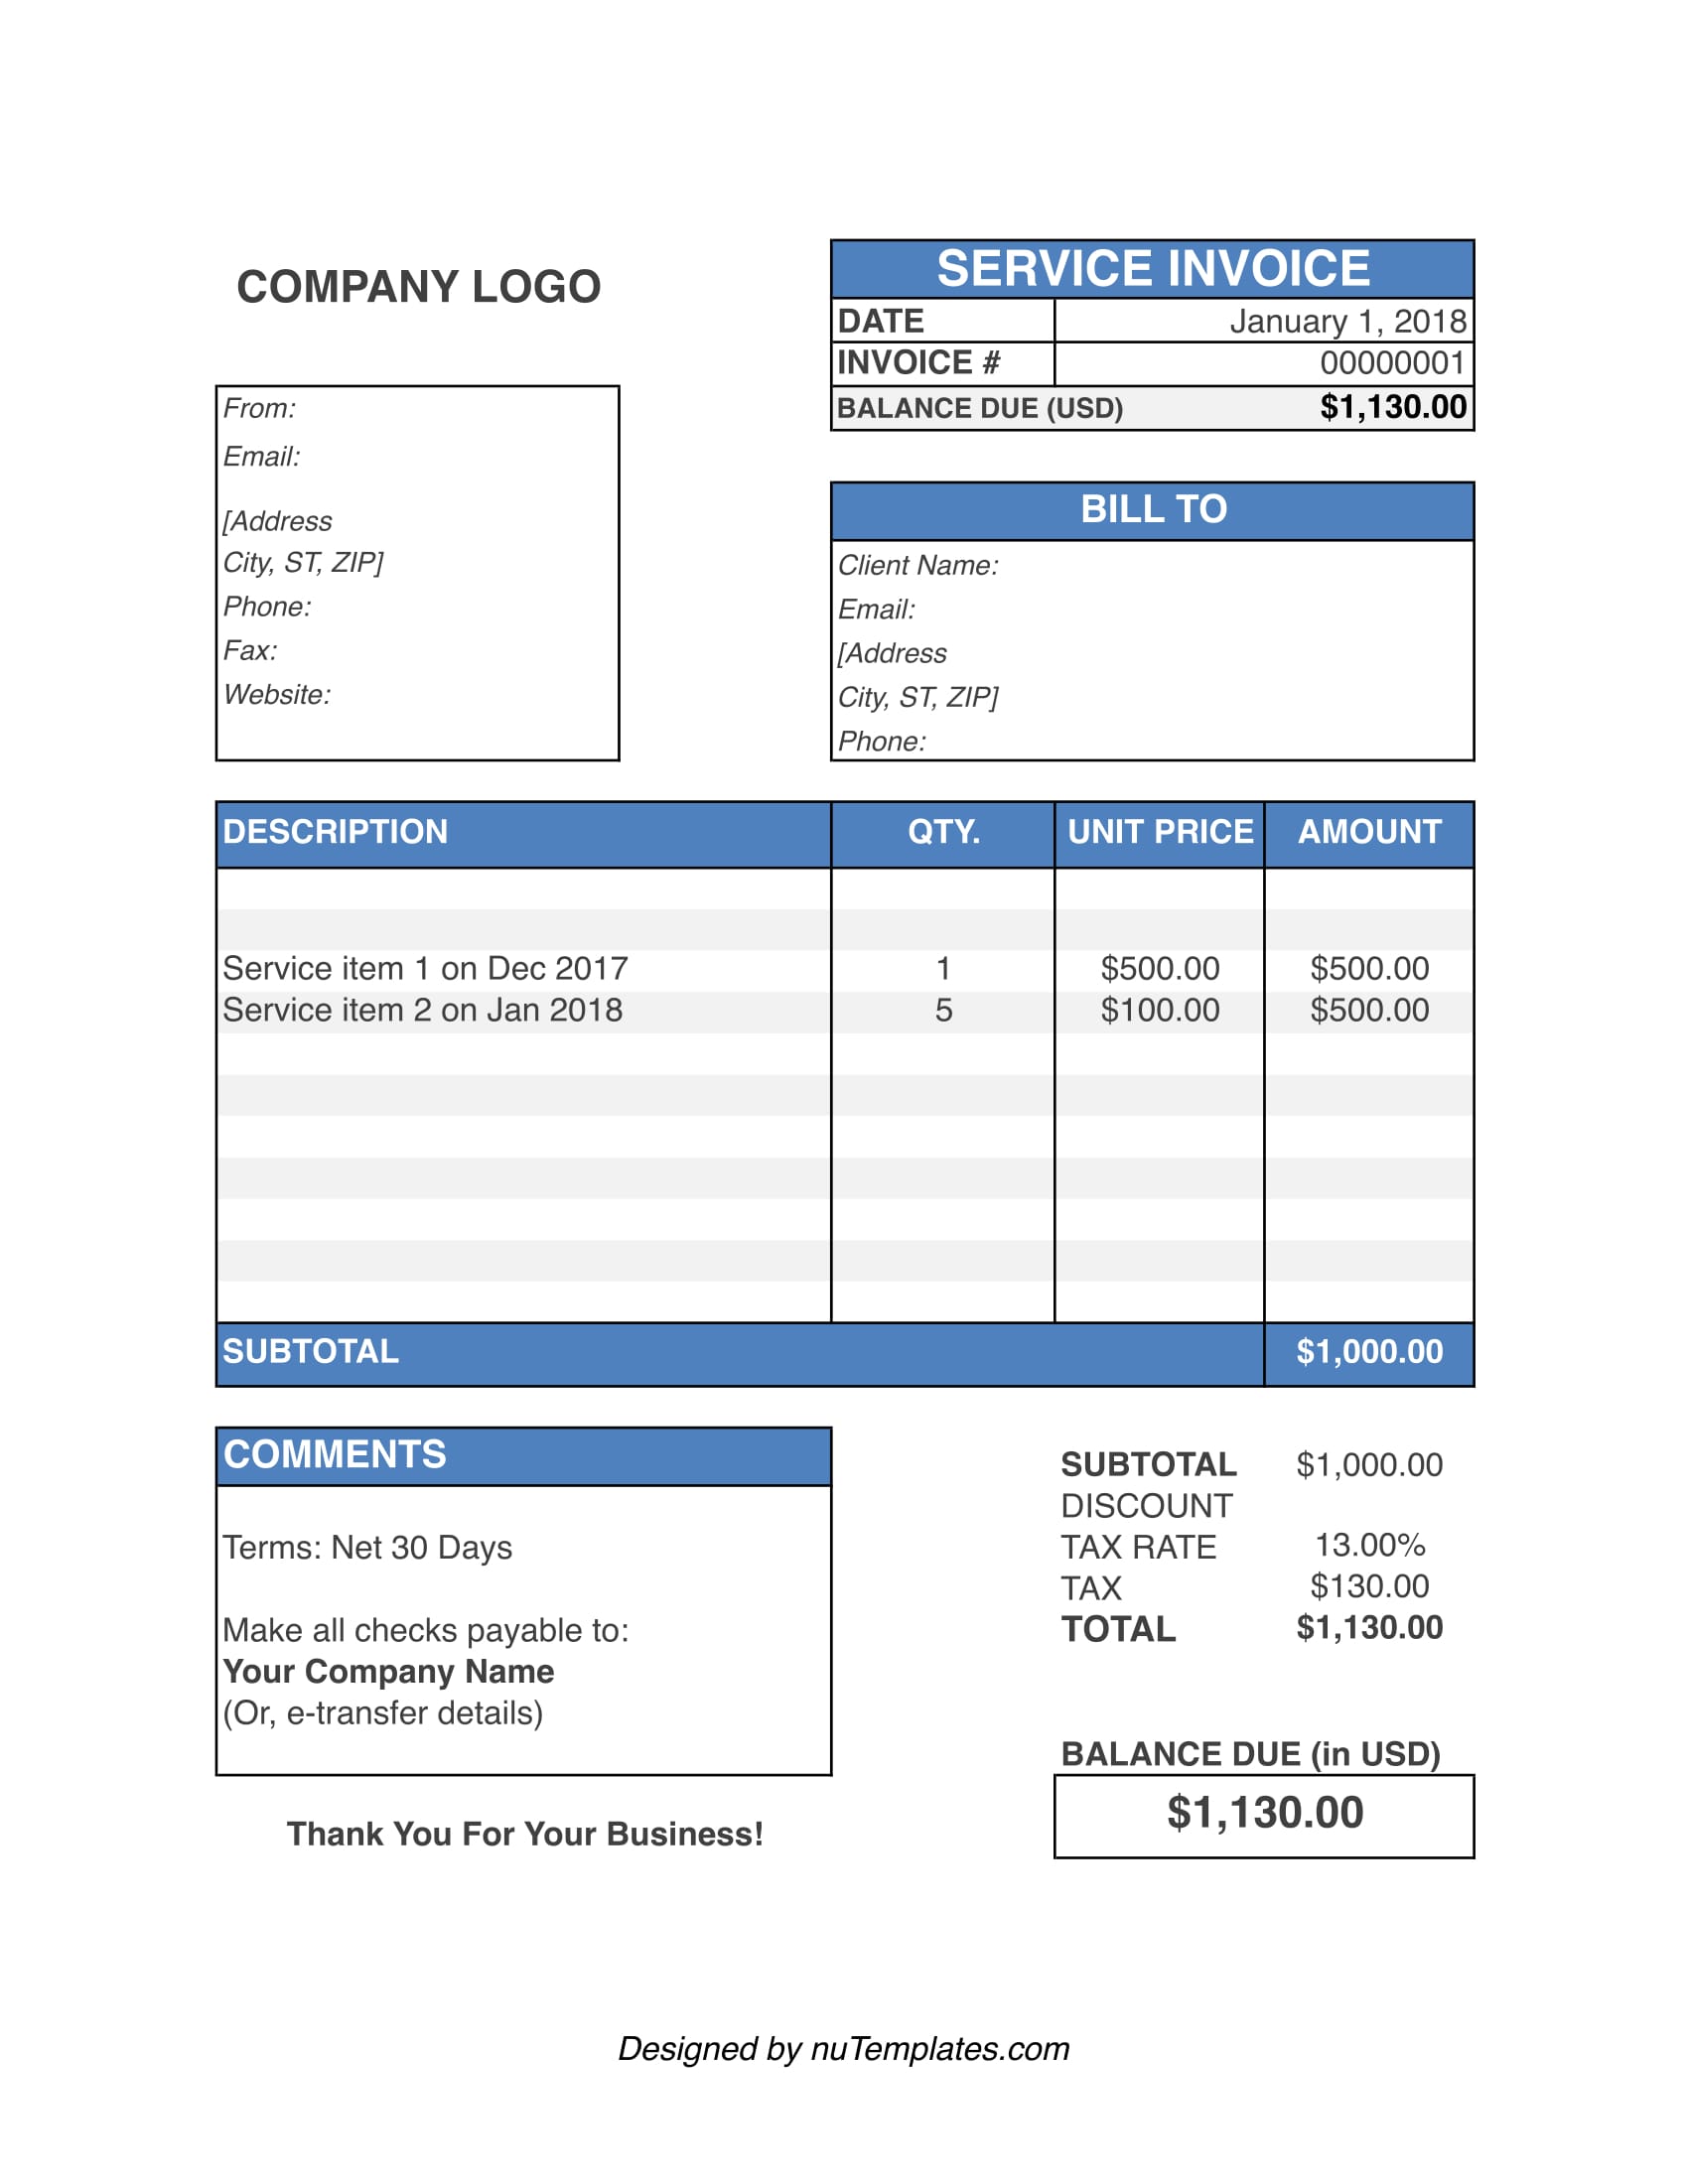 invoice-template-for-simple-invoice-sample-latest-news